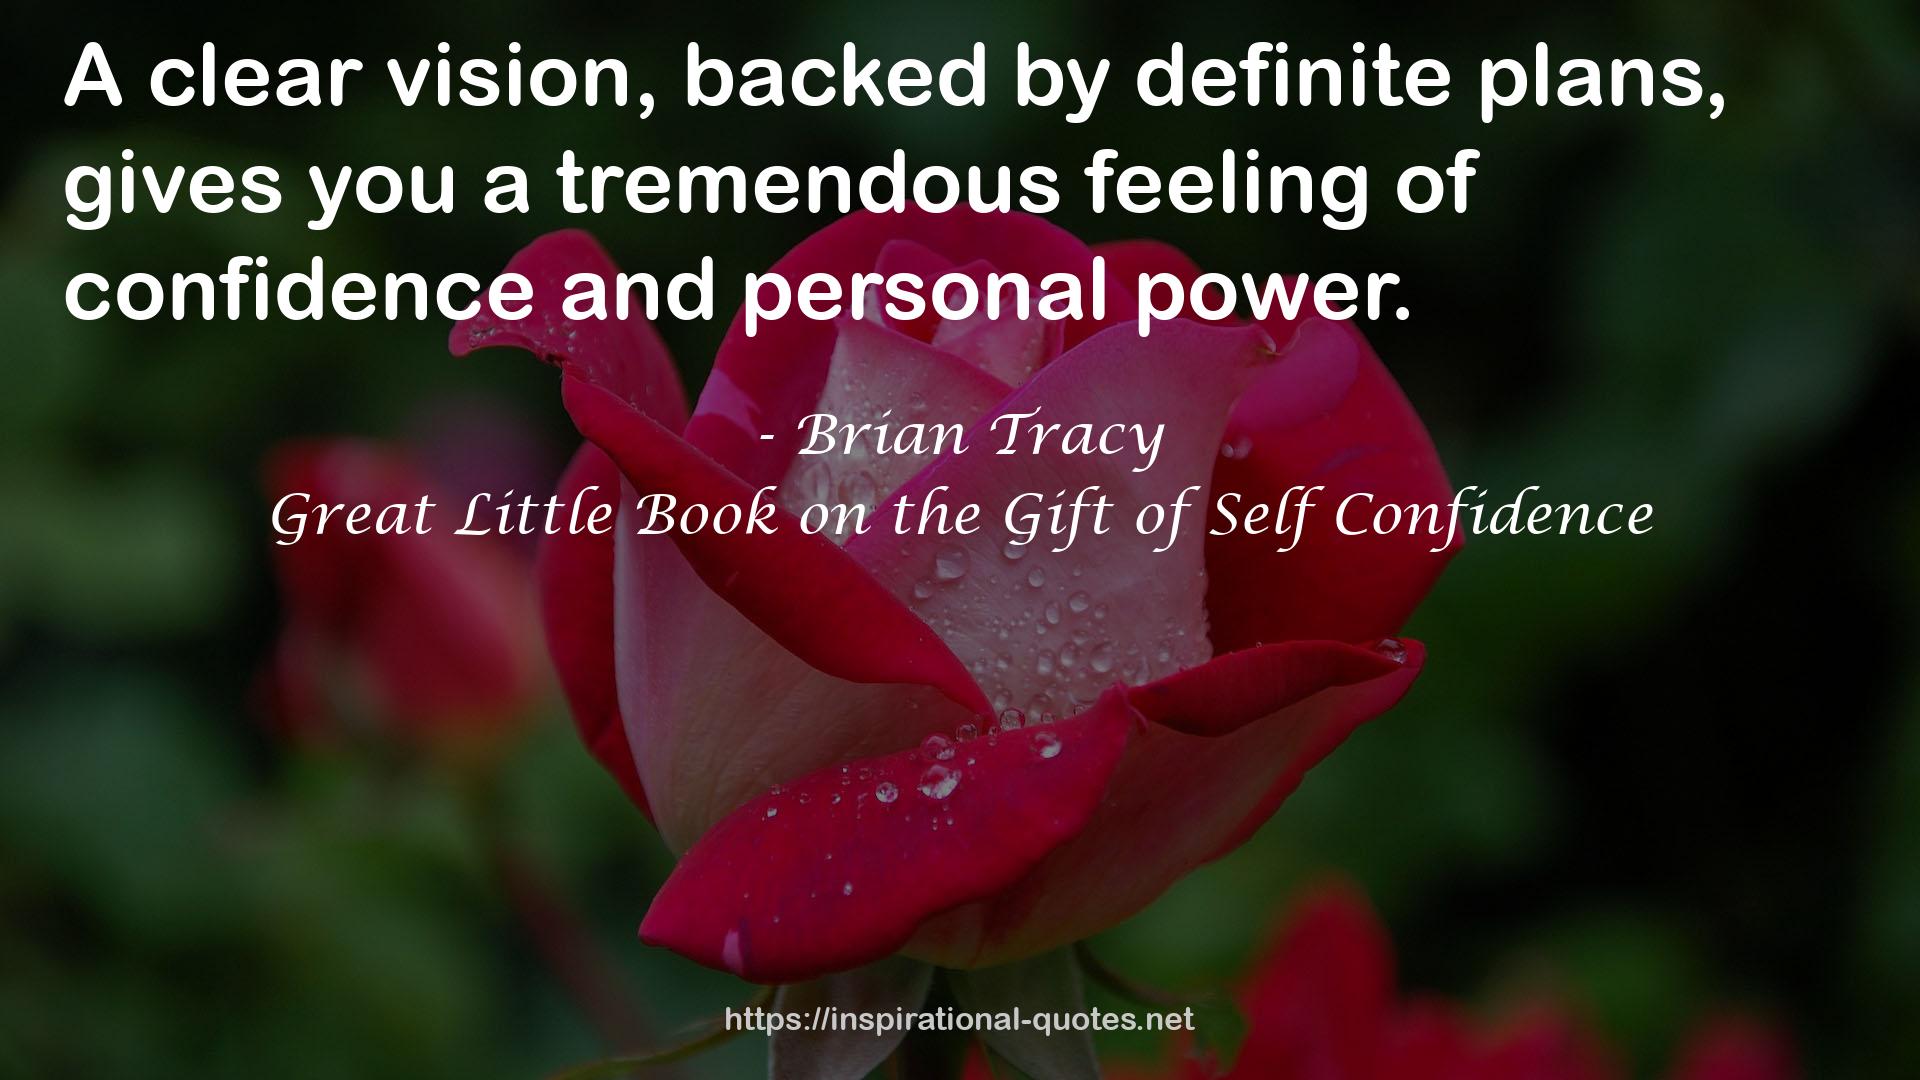 Great Little Book on the Gift of Self Confidence QUOTES